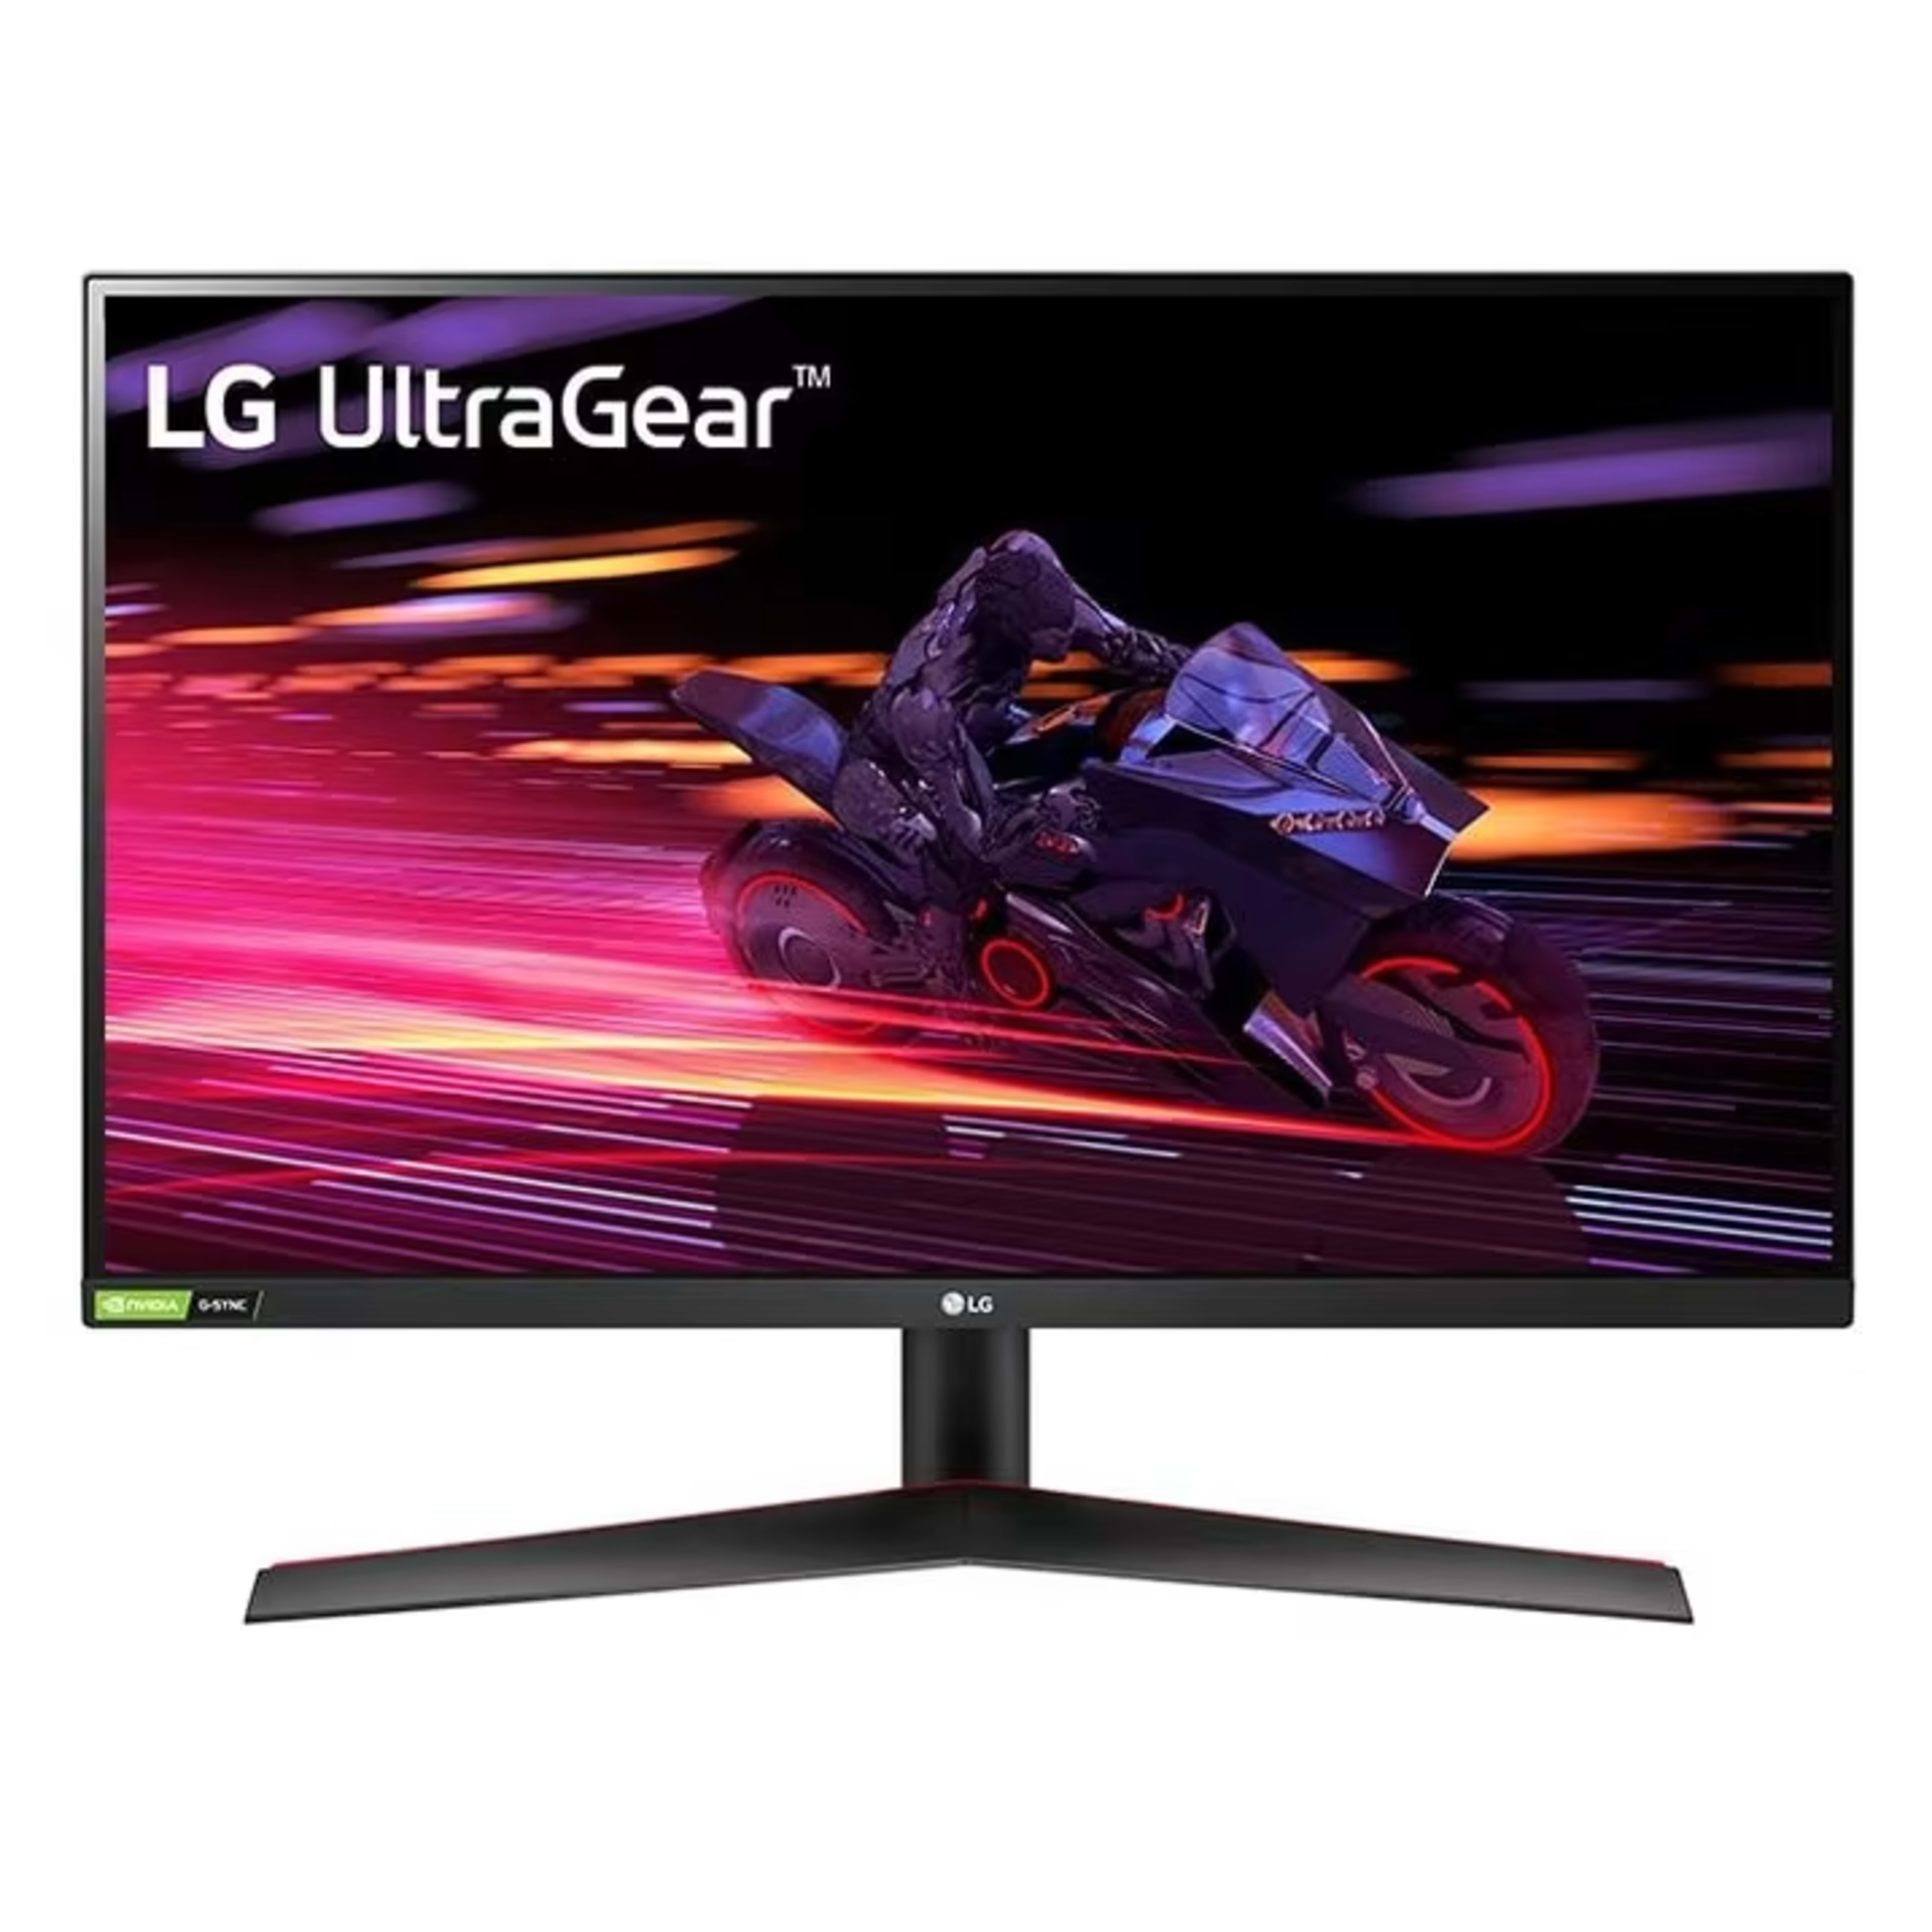 27'' UltraGear HDR Monitor 240Hz - NEW Sealed IN BOX -